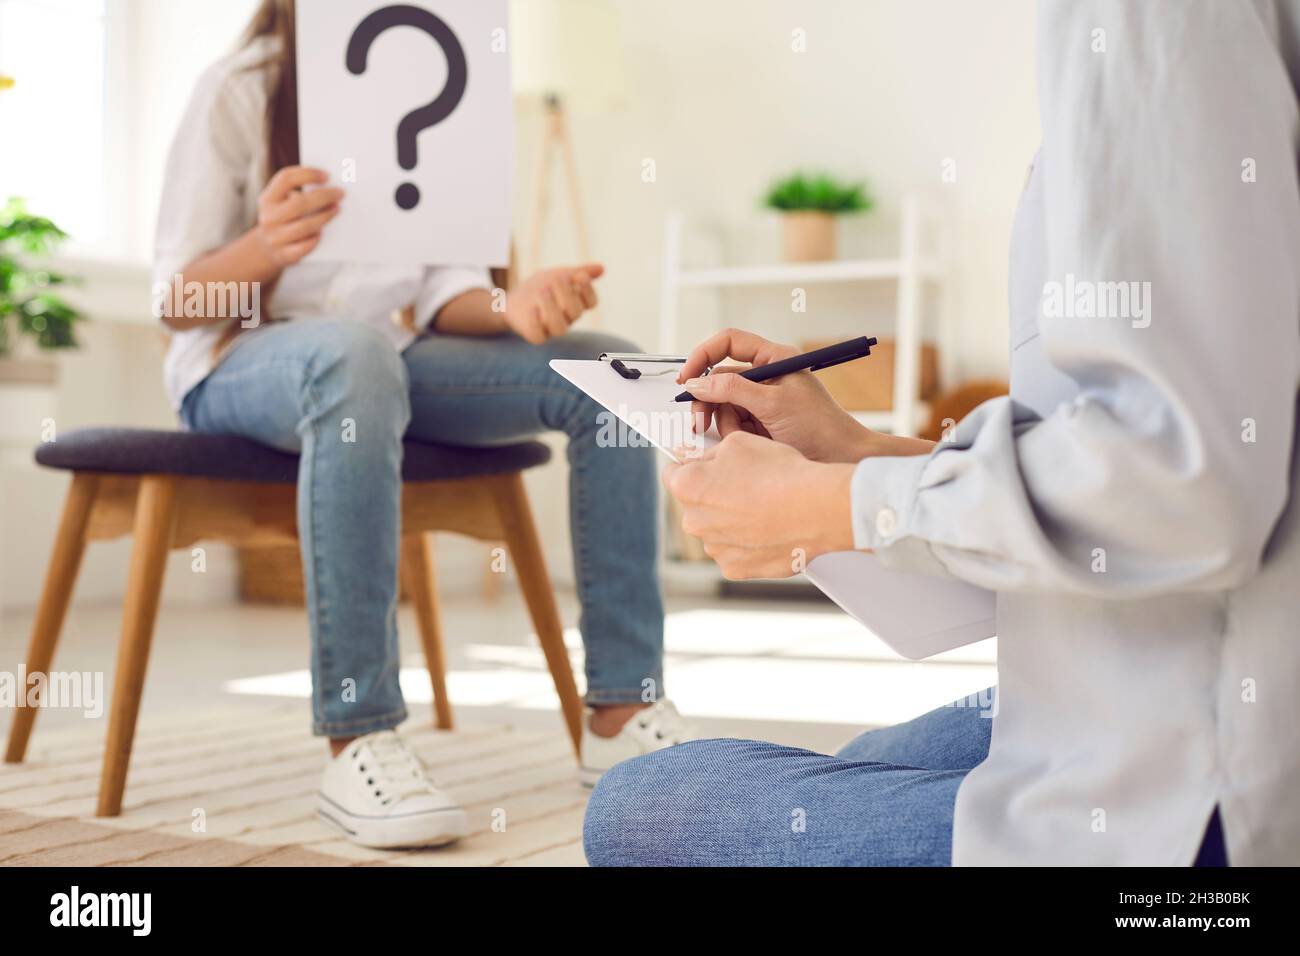 Psychologist or therapist taking notes while interviewing child during therapy session Stock Photo